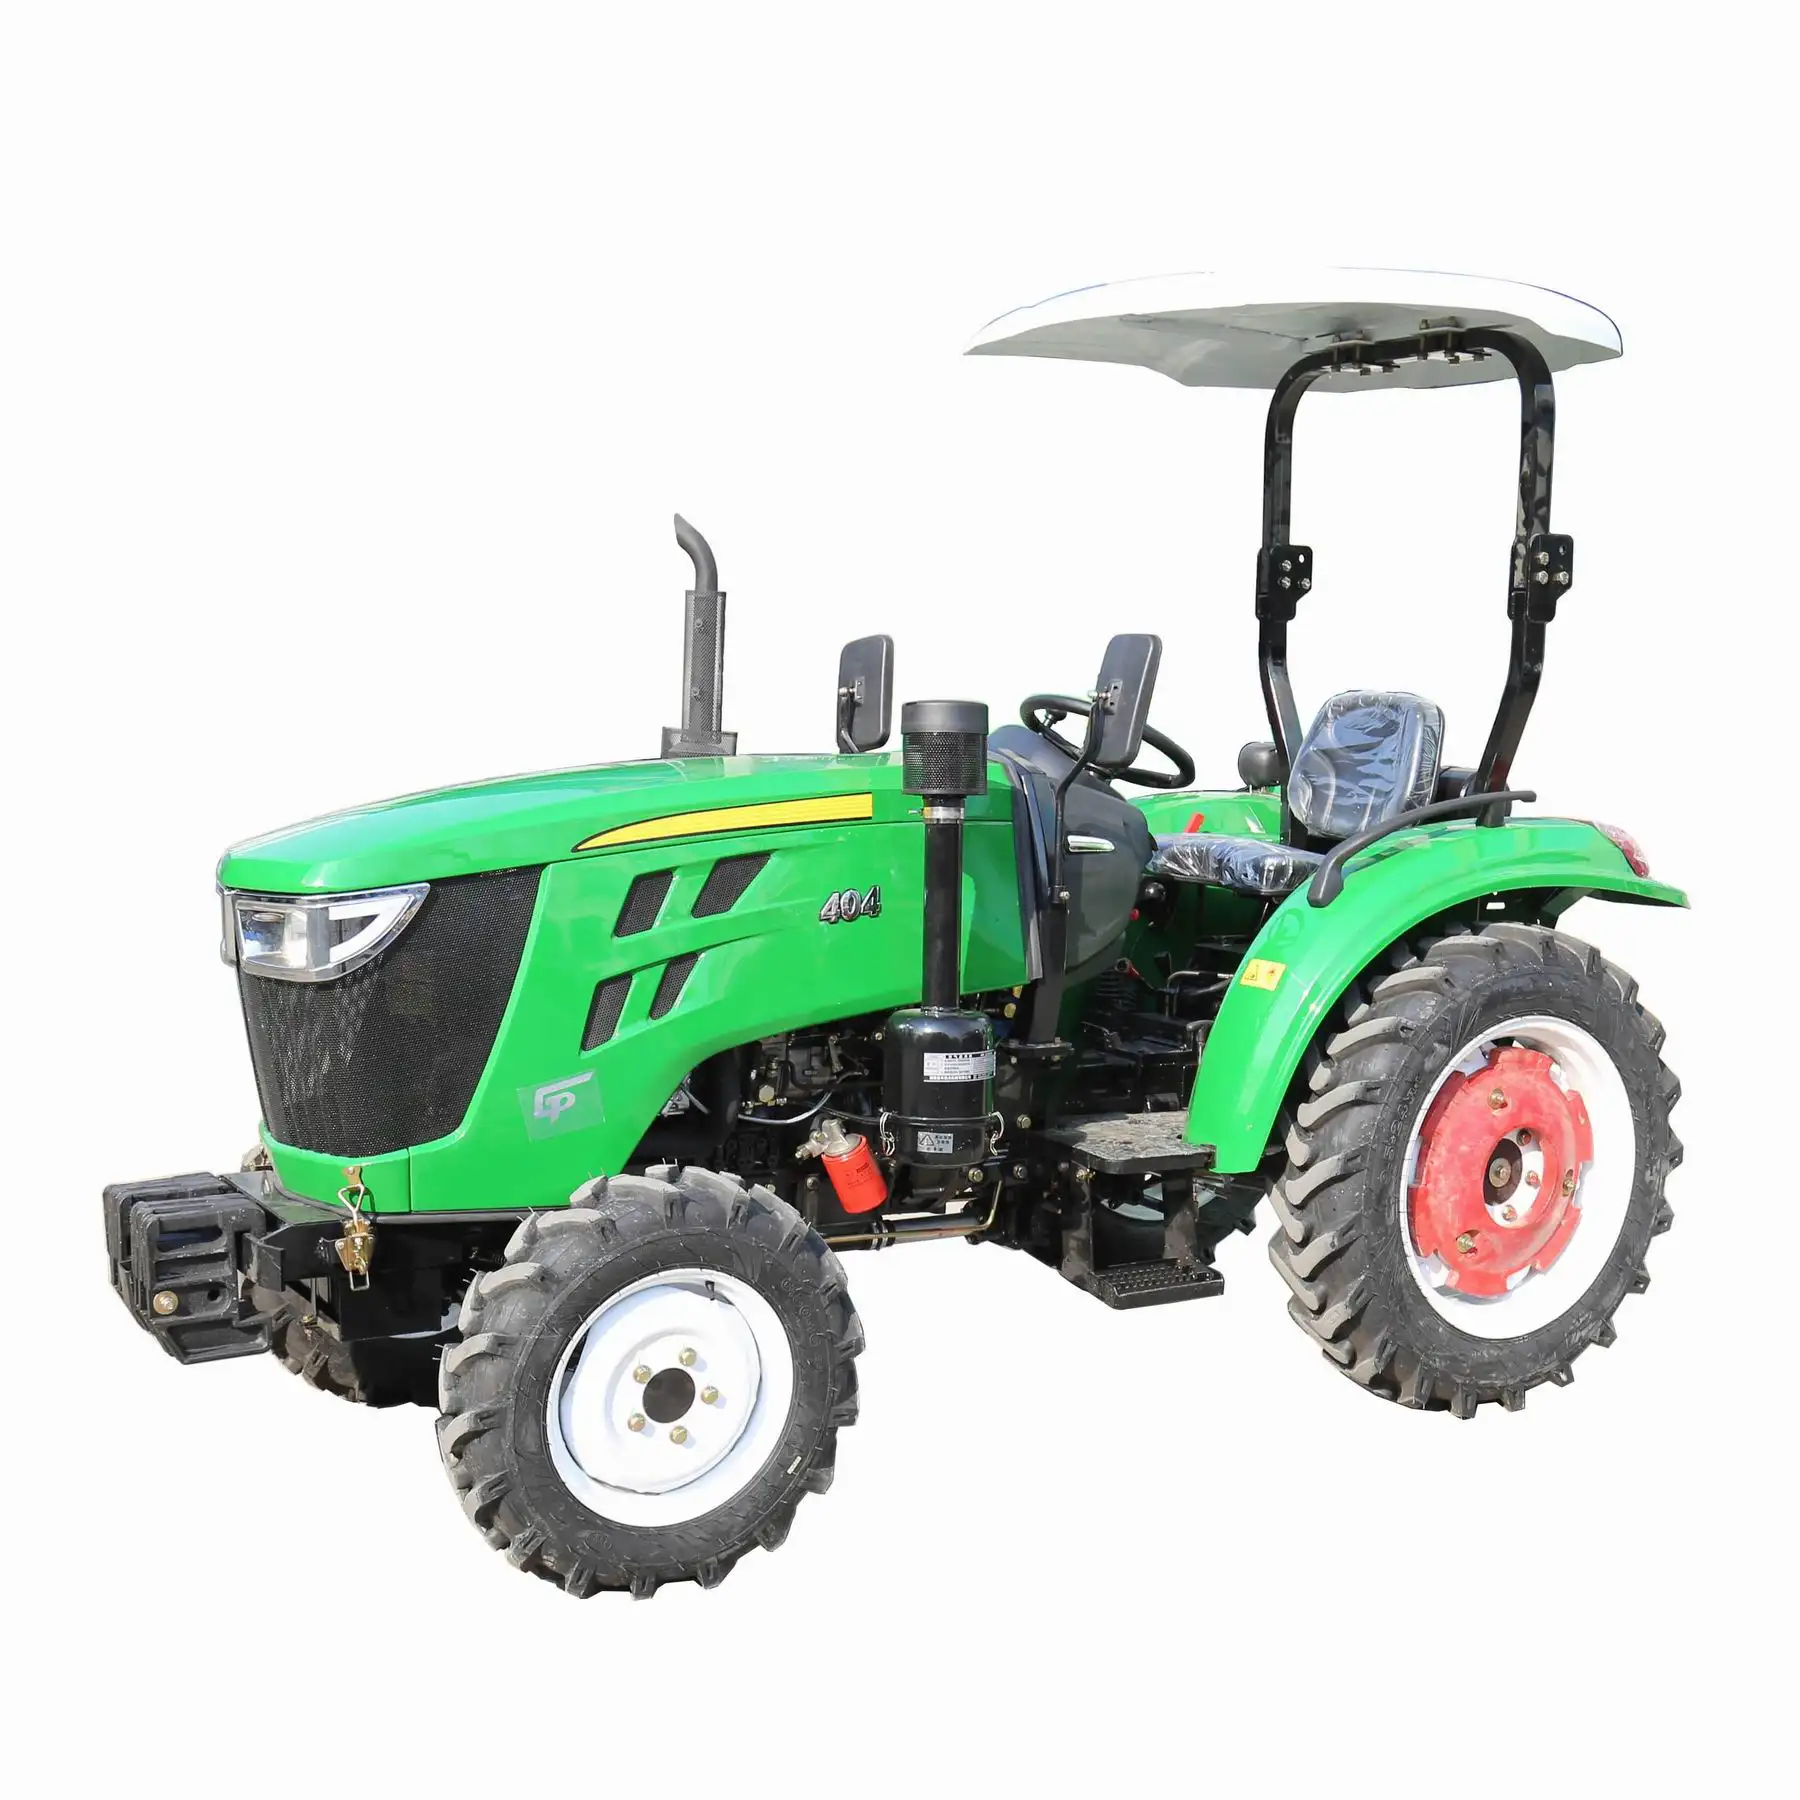 Chinese shandong 40hp 4x4 cheap mini smallest farm agricultural tractors for sale price ethiopia